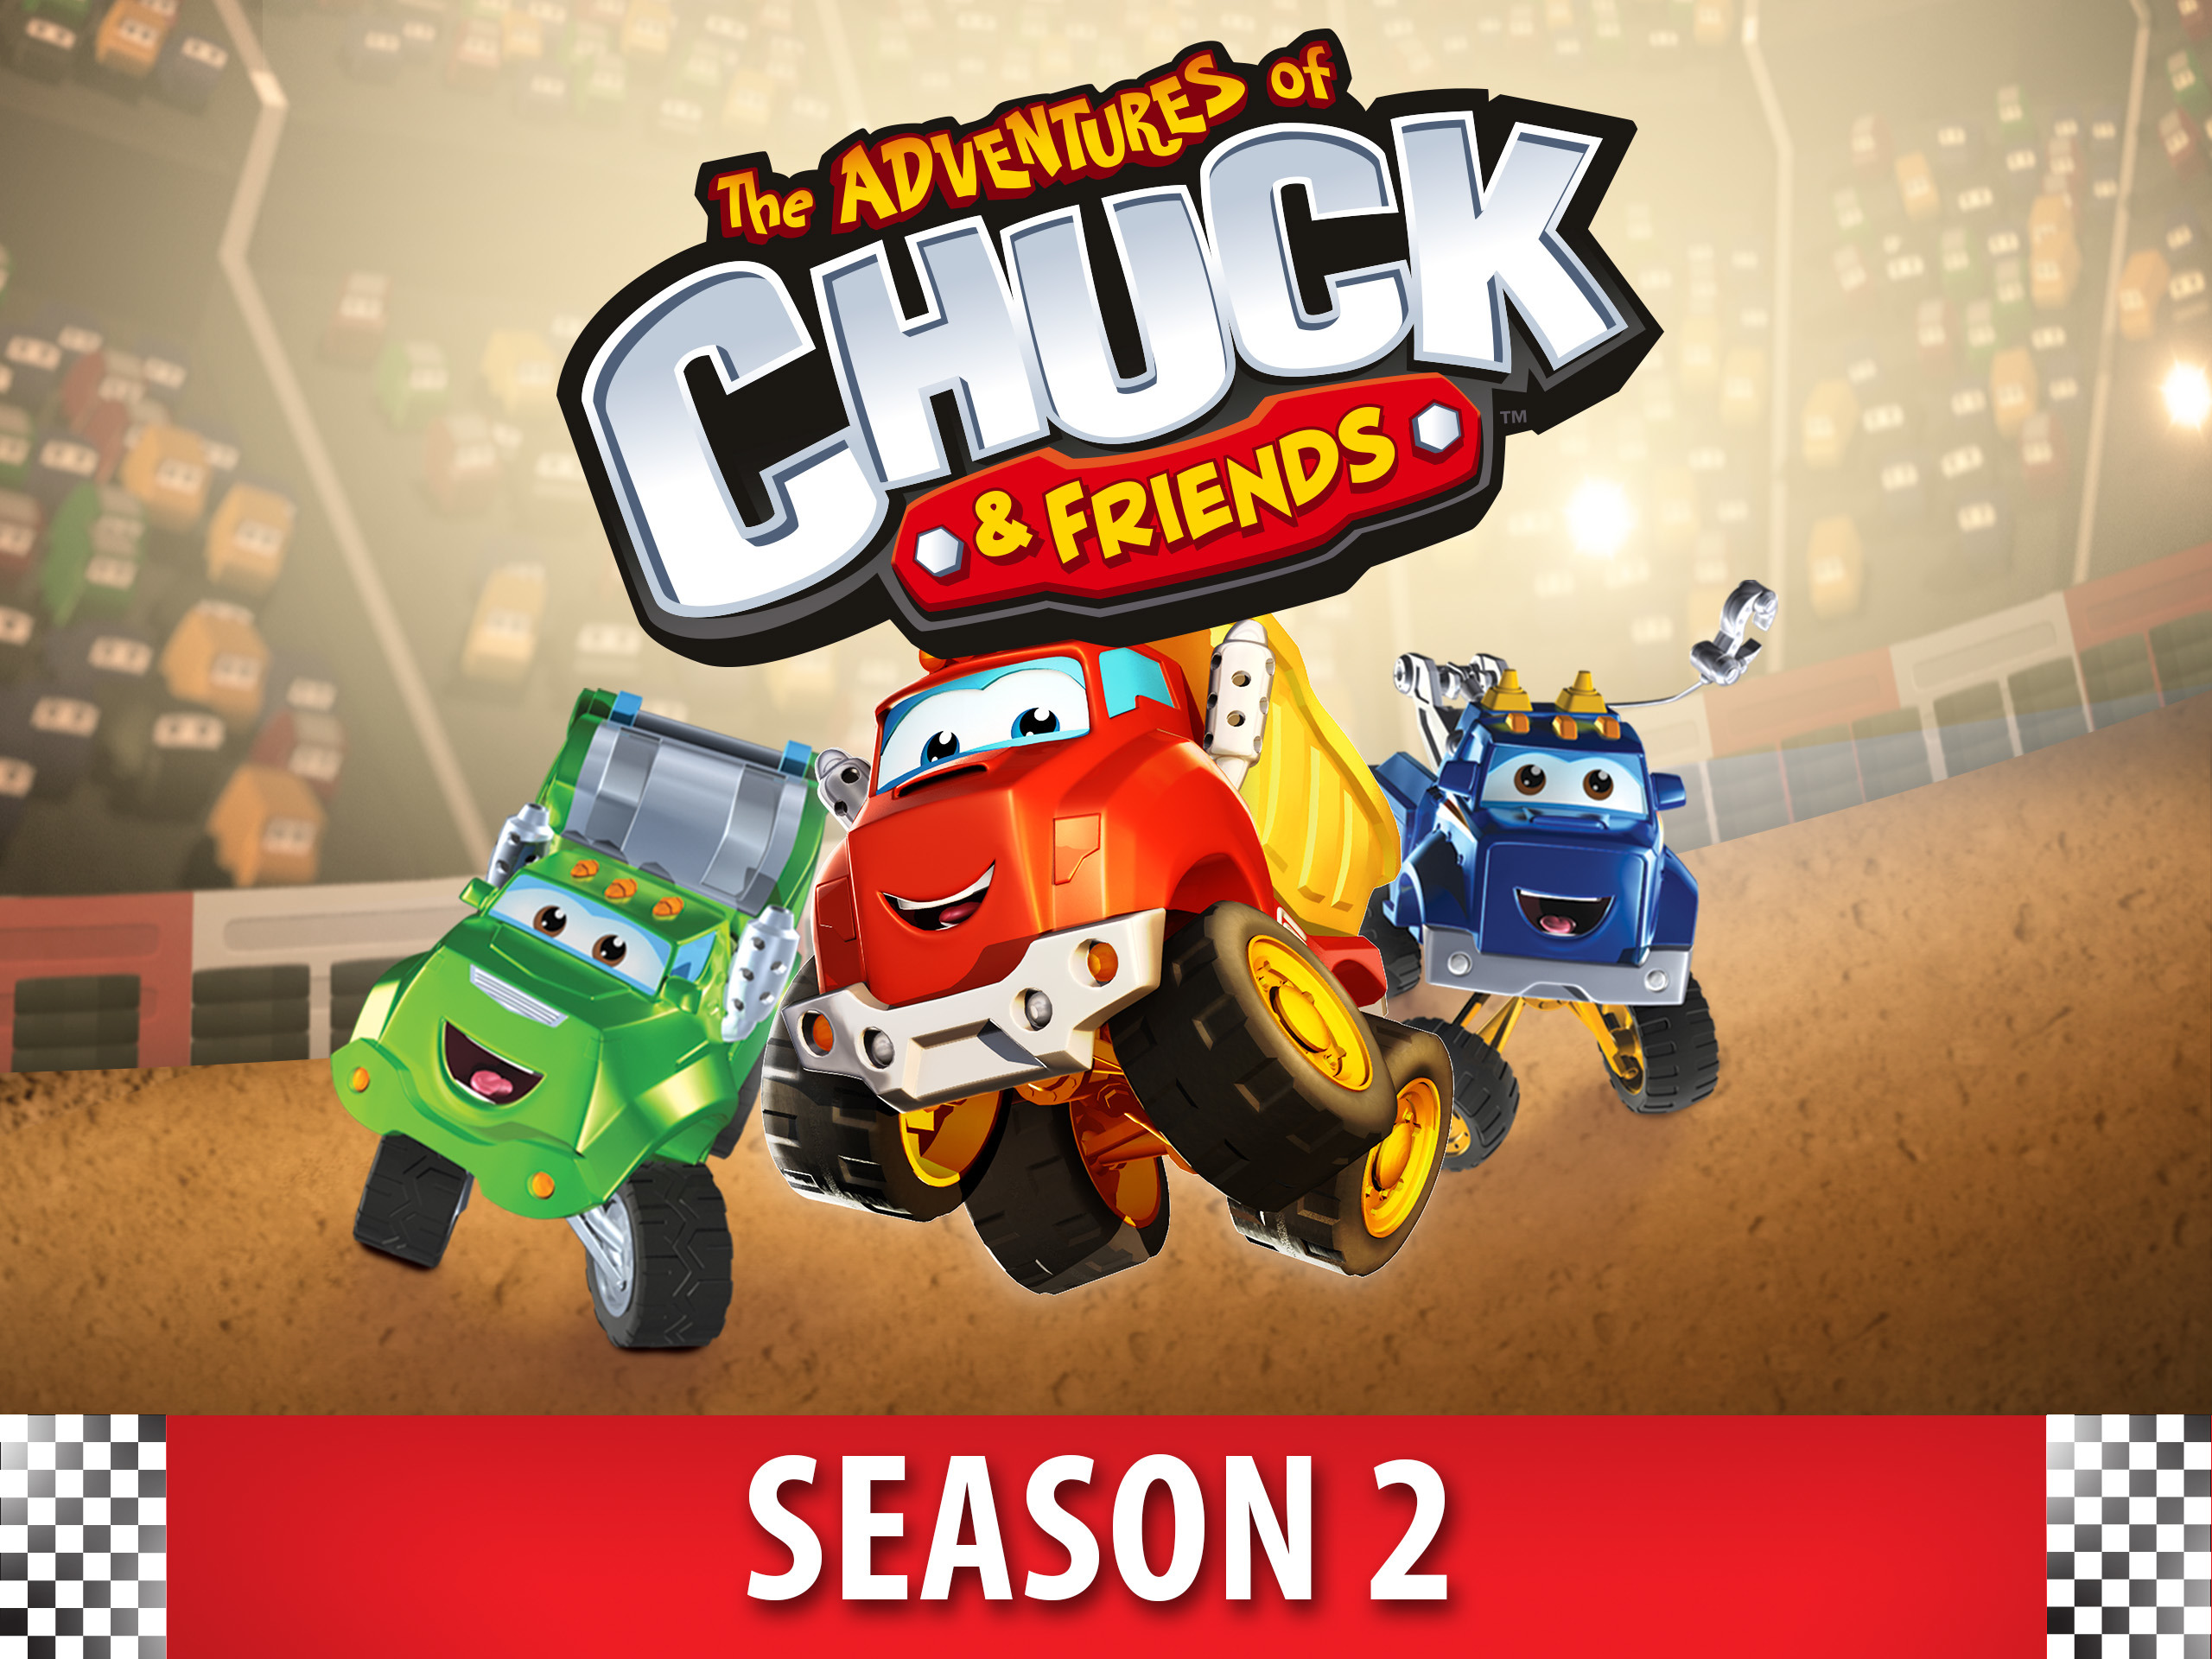 Prime Video: The Adventures of Chuck & Friends